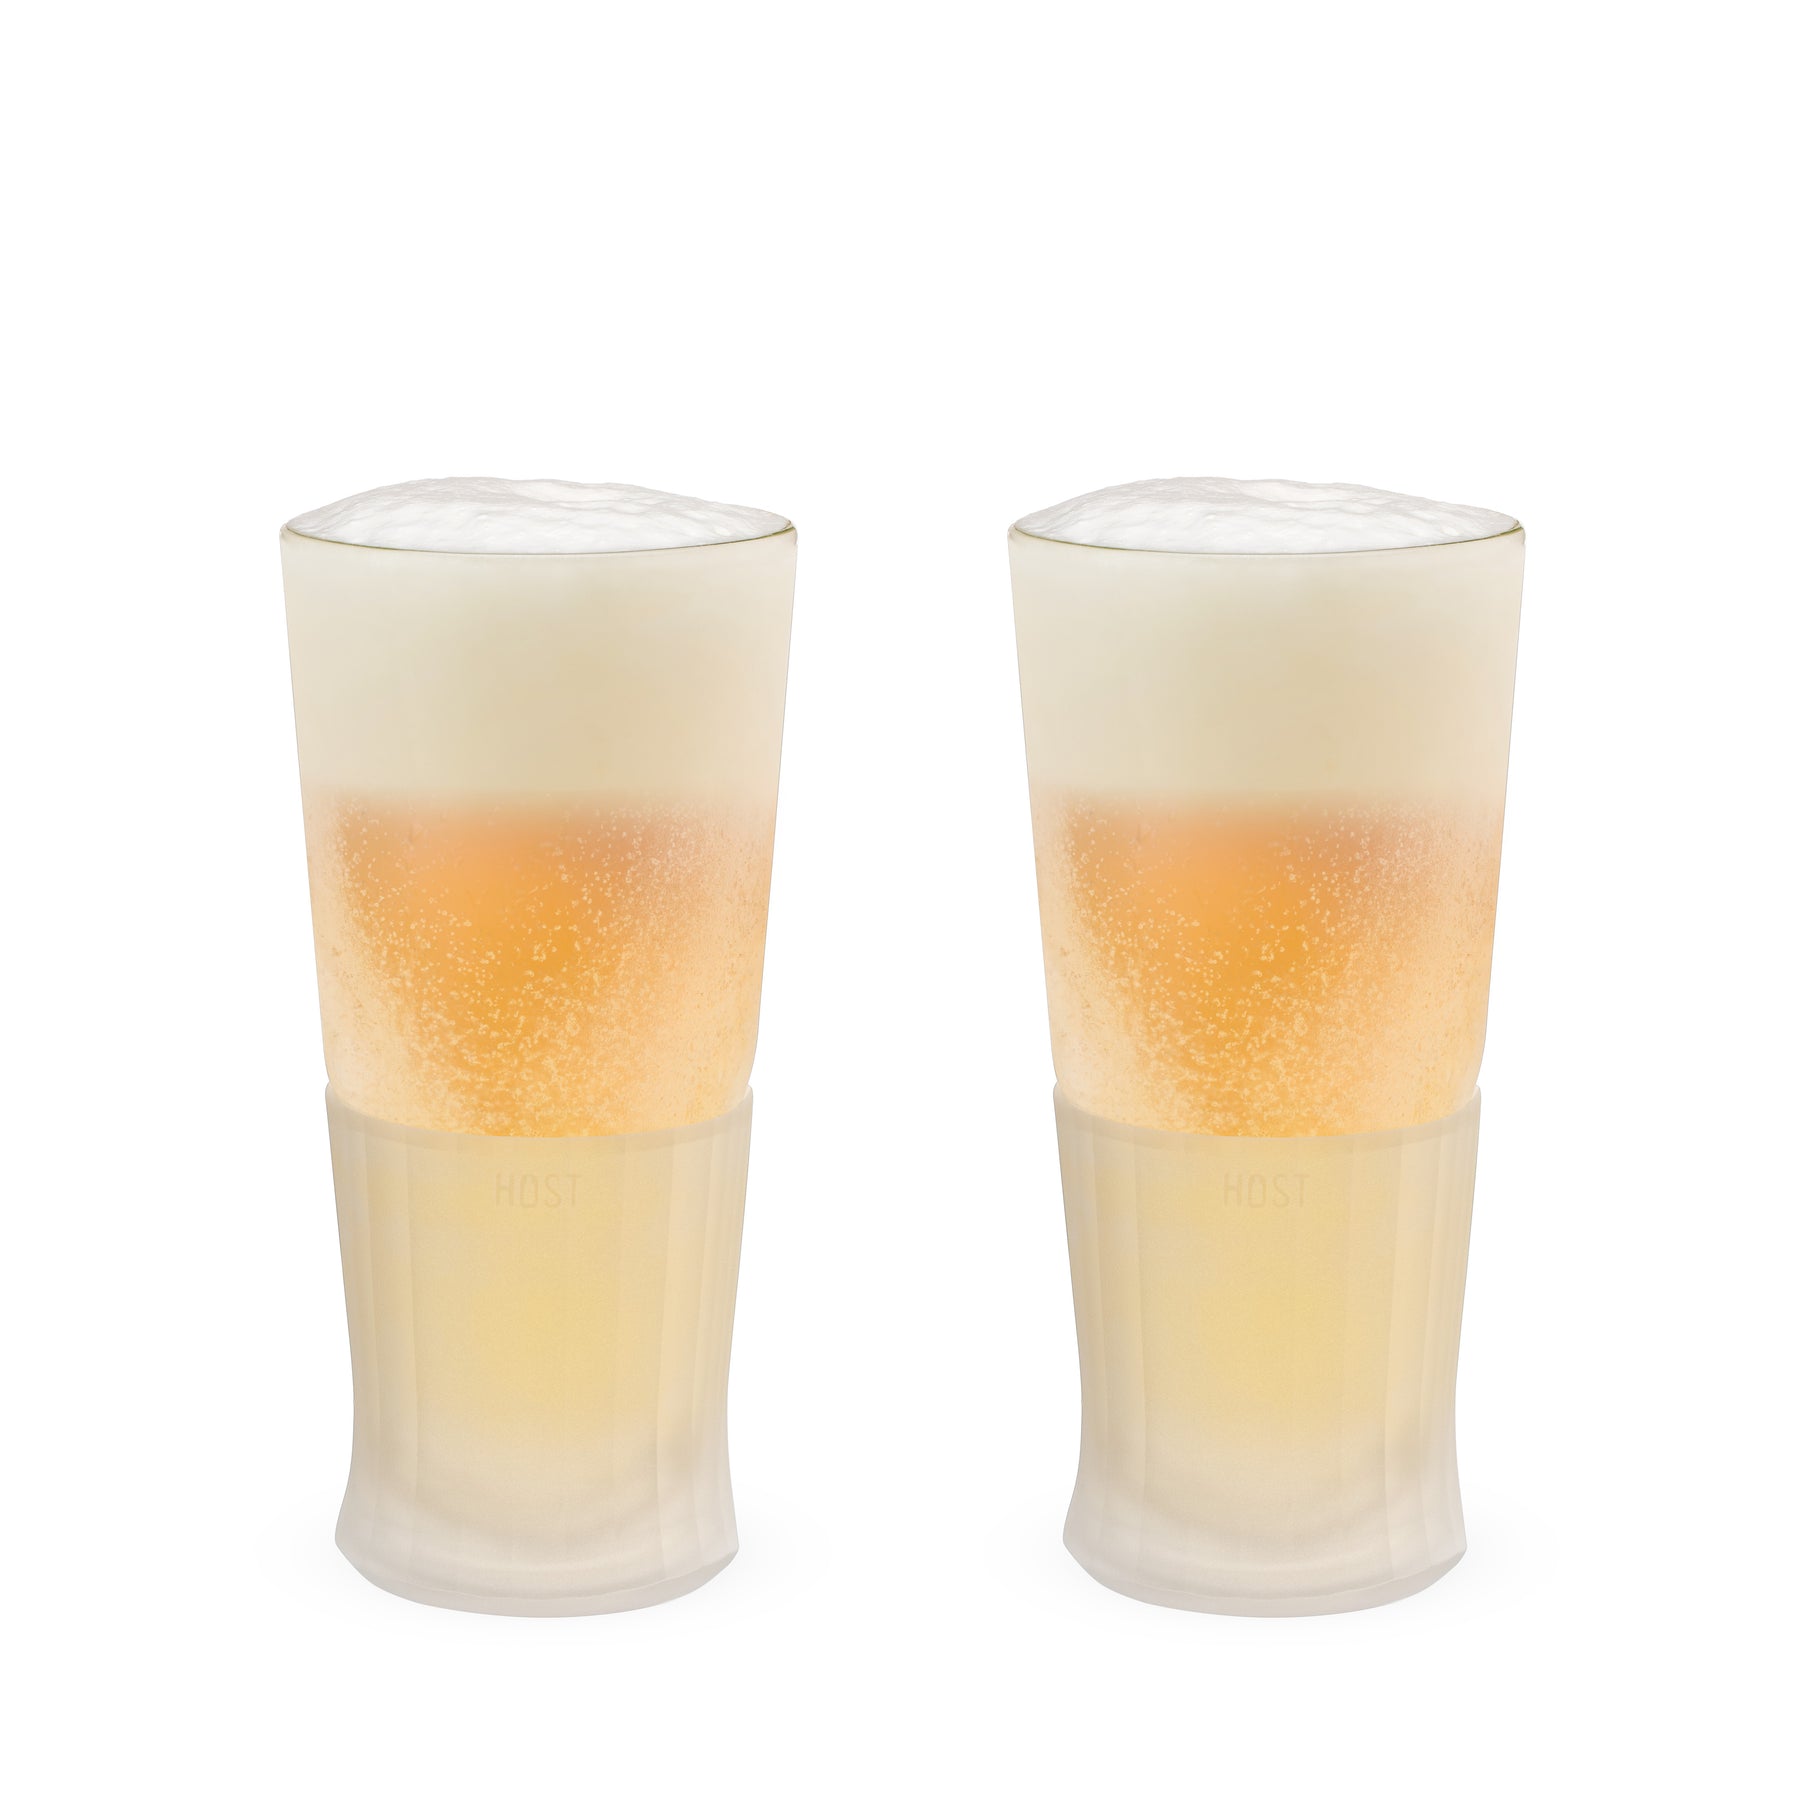 Host FREEZE Beer Glasses, Frozen Beer Mugs, Freezable Pint Glass Set,  Insulated Beer Glass to Keep Your Drinks Cold, Double Walled Insulated  Glasses, Tumbler for Iced Coffee, 16oz, Set of 2